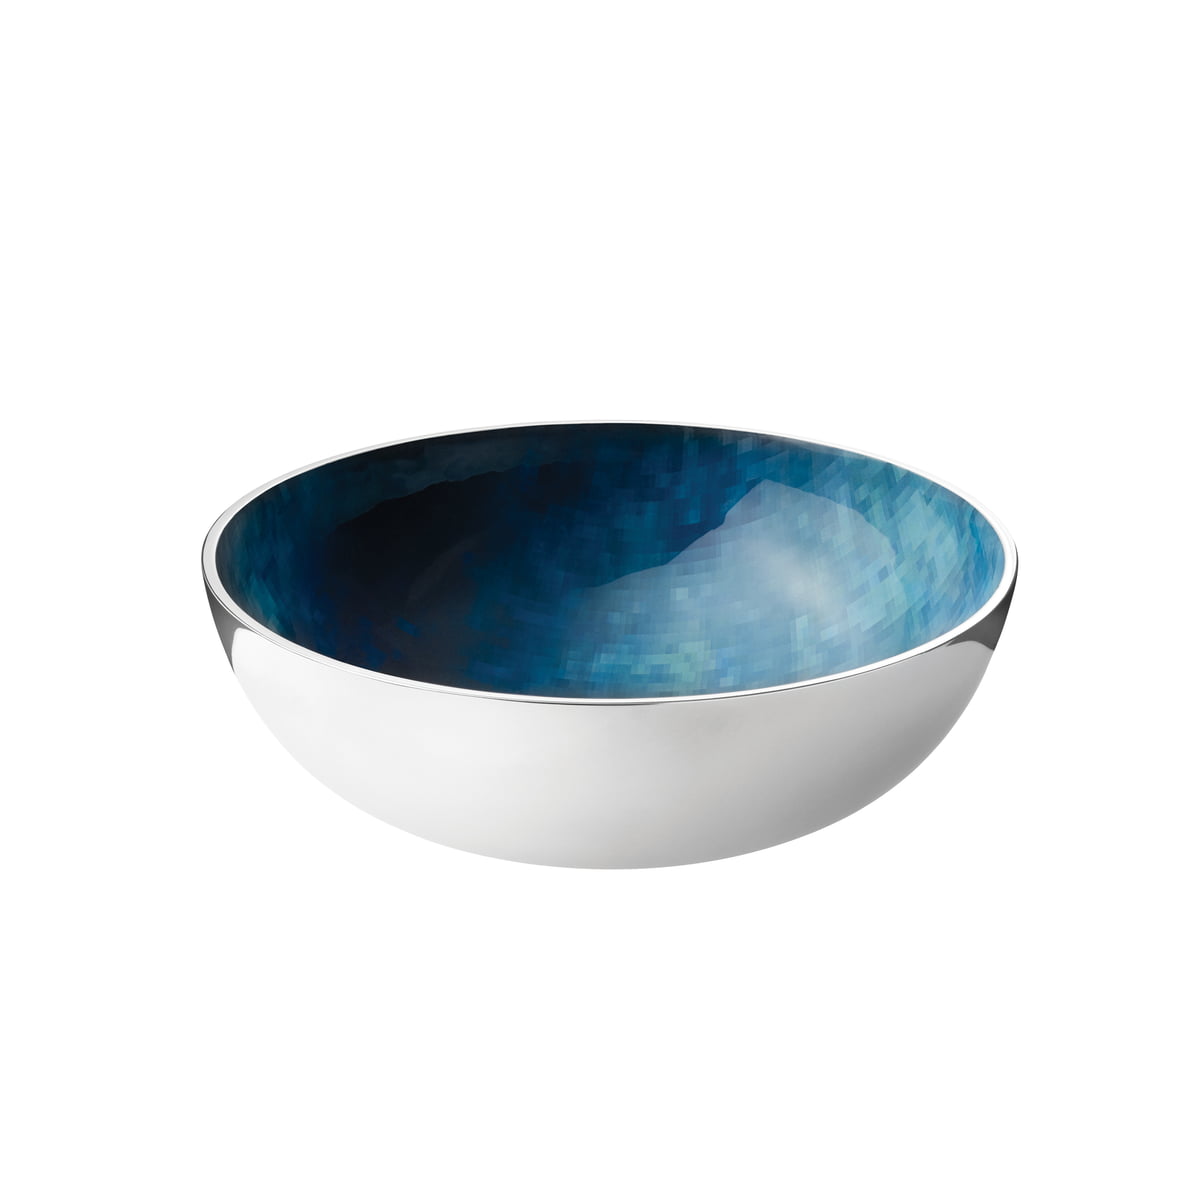 Stockholm Horizon Bowl Stelton in by shop our